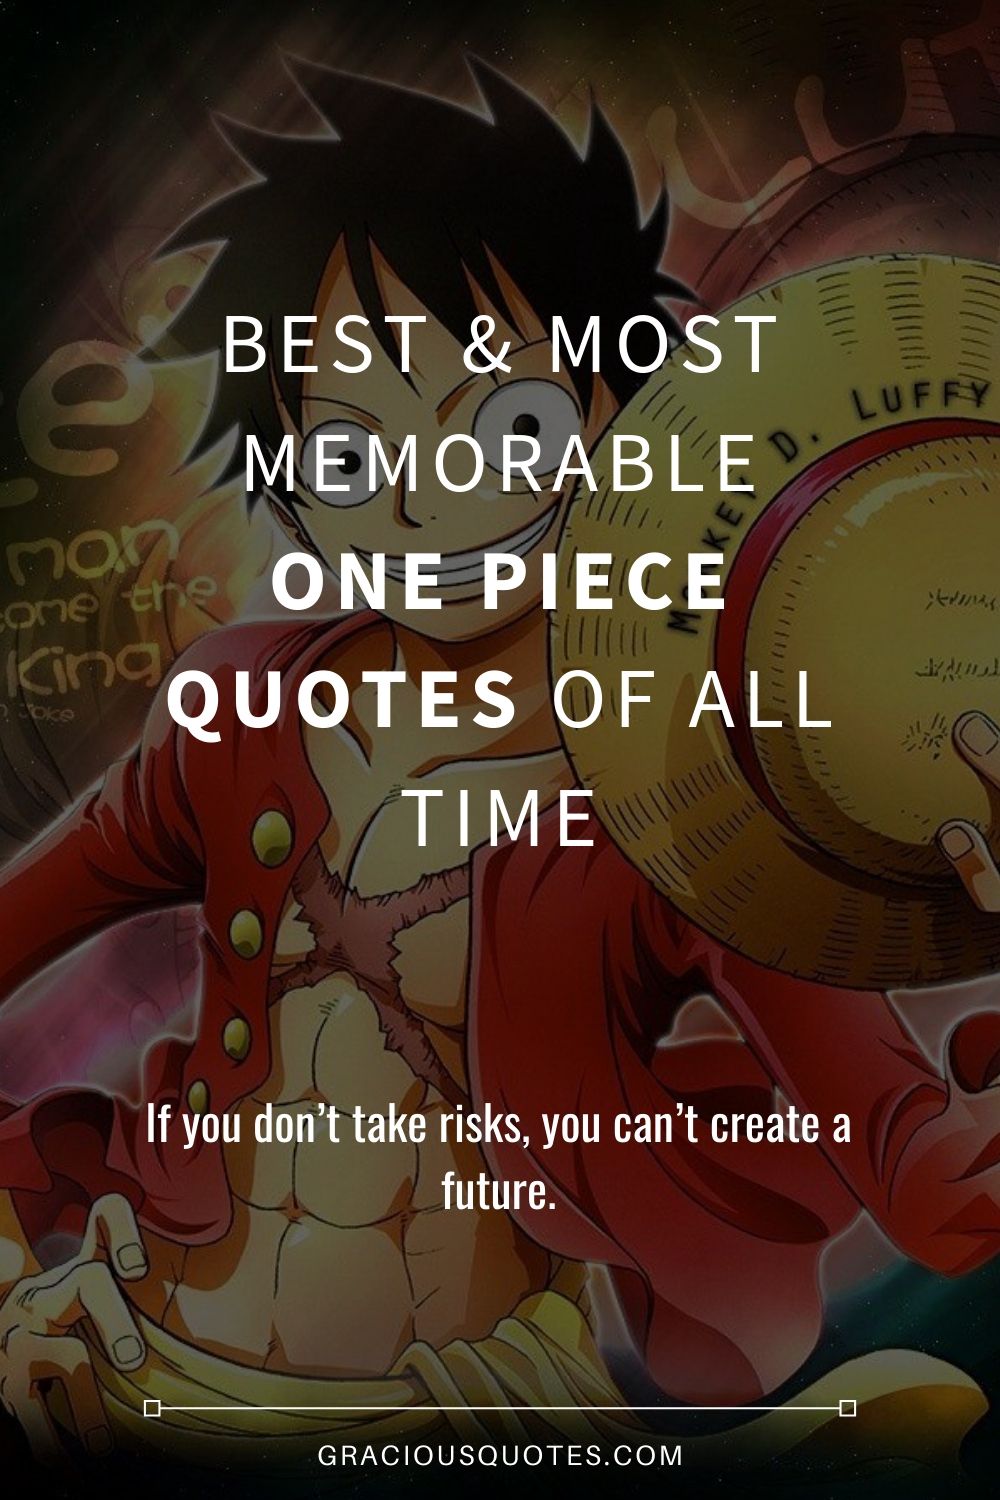 Best-Most-Memorable-One-Piece-Quotes-of-All-Time-Gracious-Quotes